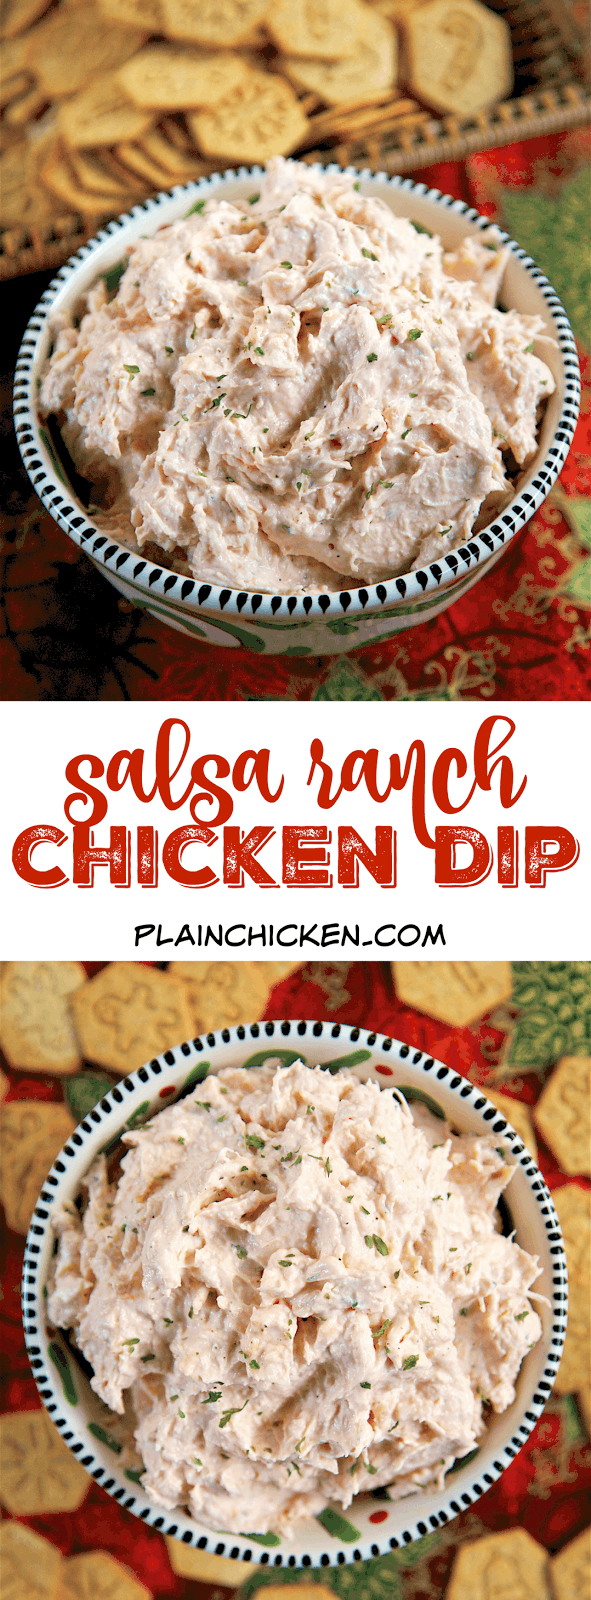 Salsa Ranch Chicken Dip - only 4 ingredients! You probably have everything in your pantry right now to whip up the delicious dip! Literally takes one minute to make. We serve it with wheat thins and veggies. Great for parties!